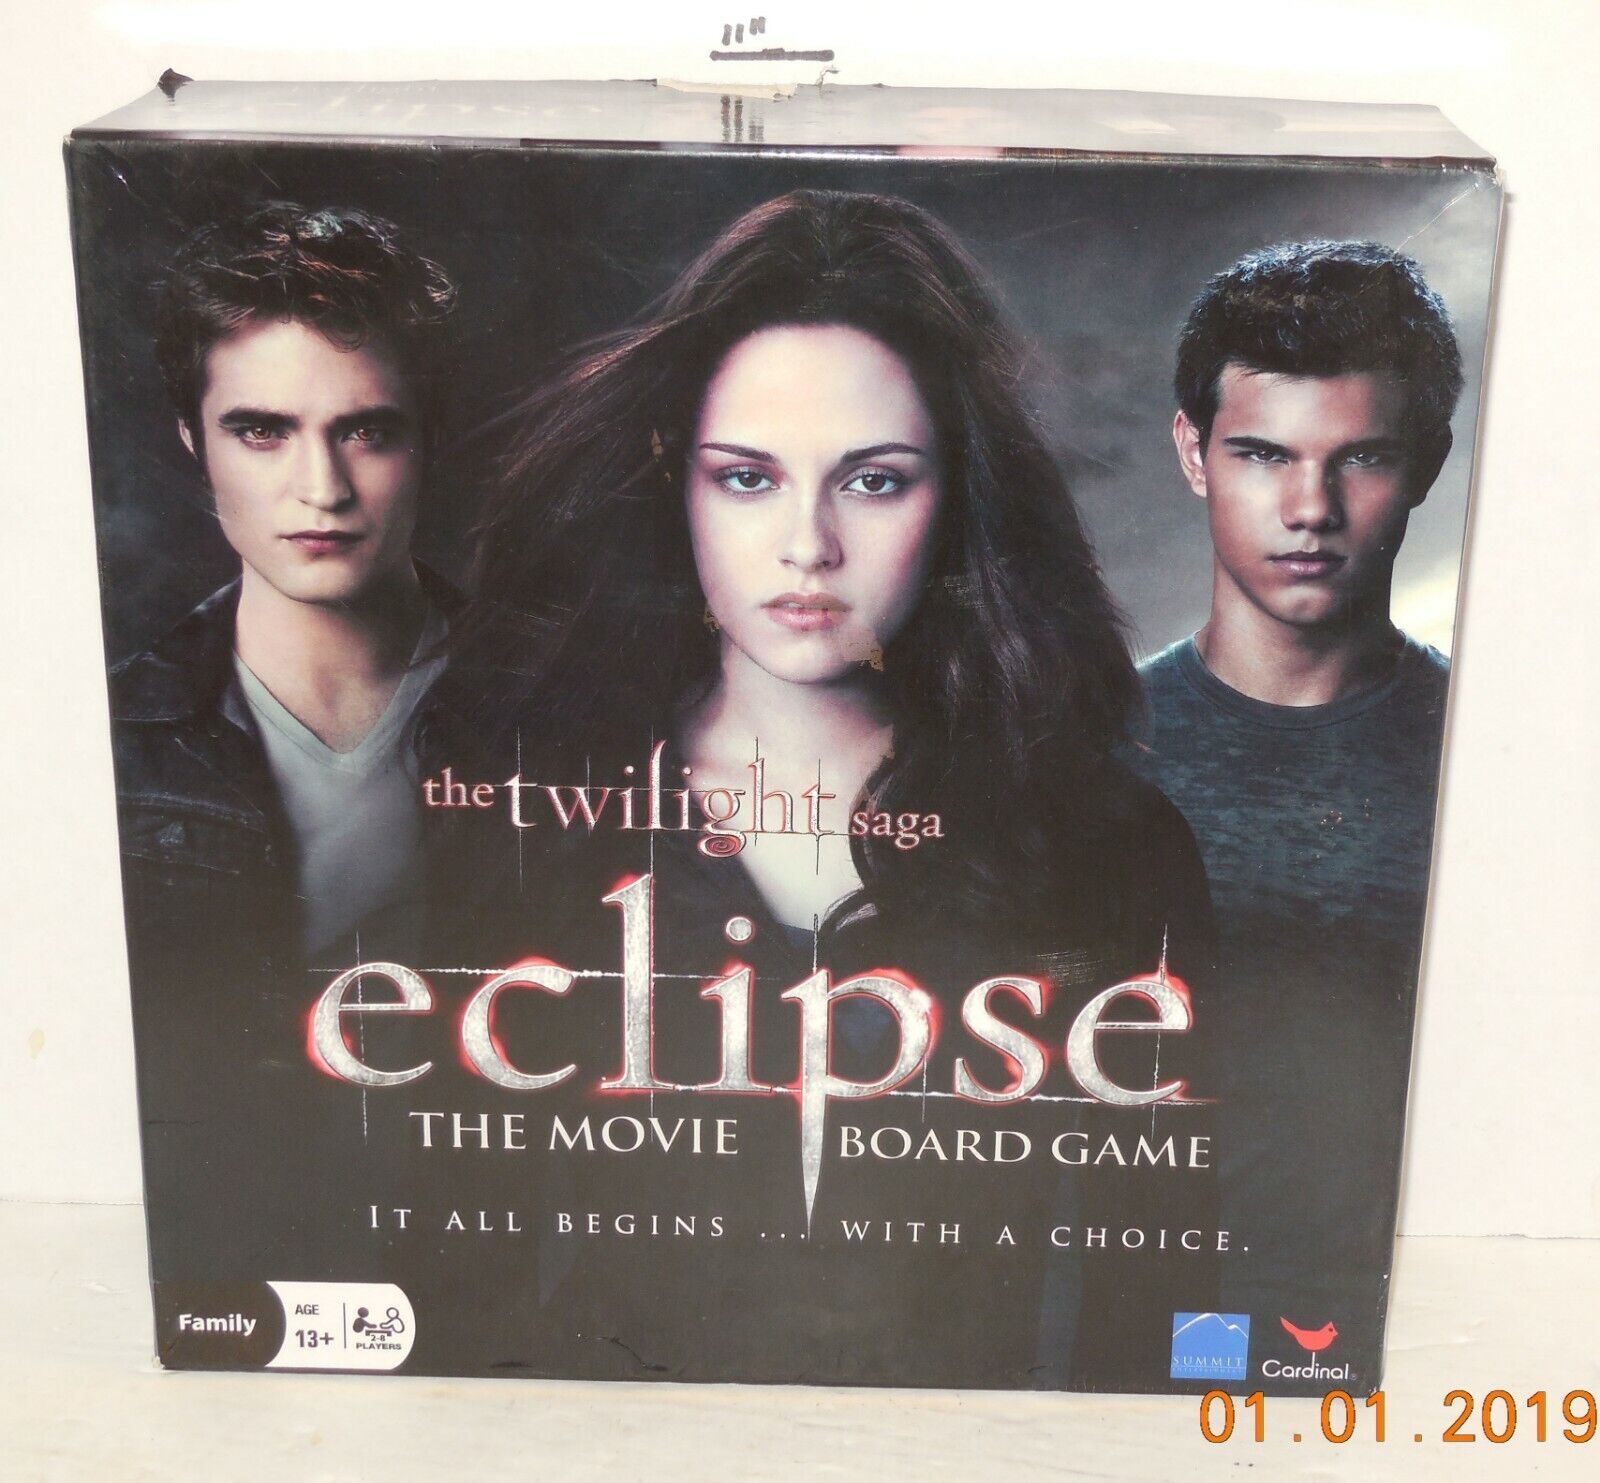 2009 Cardinal Twilight Saga Eclipse The Movie Board Game Family 100% Complete - $9.60